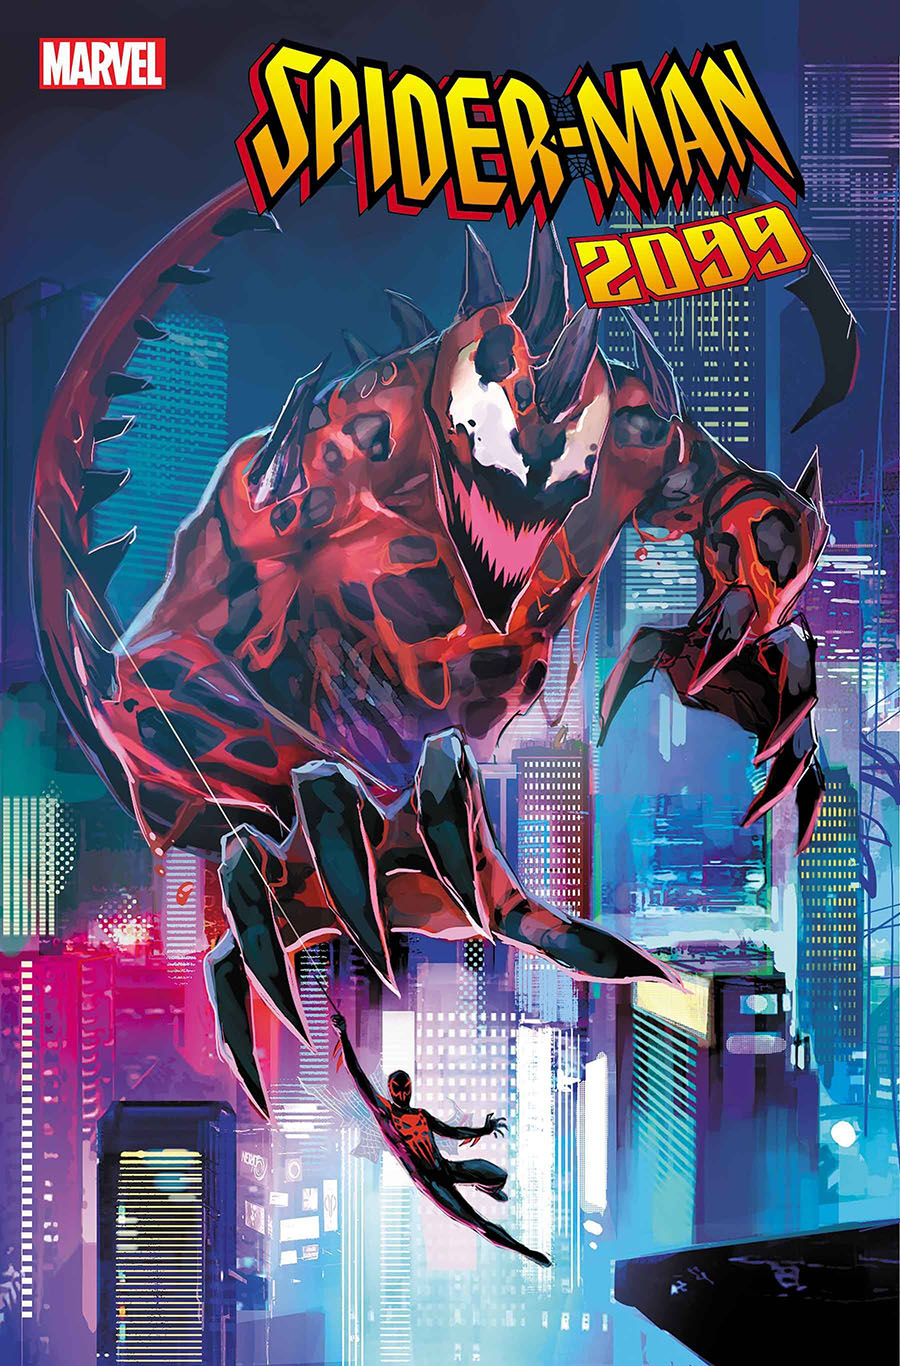 Spider-Man 2099 Dark Genesis #1 Cover B Variant Rod Reis Connecting Cover (Limit 1 Per Customer)